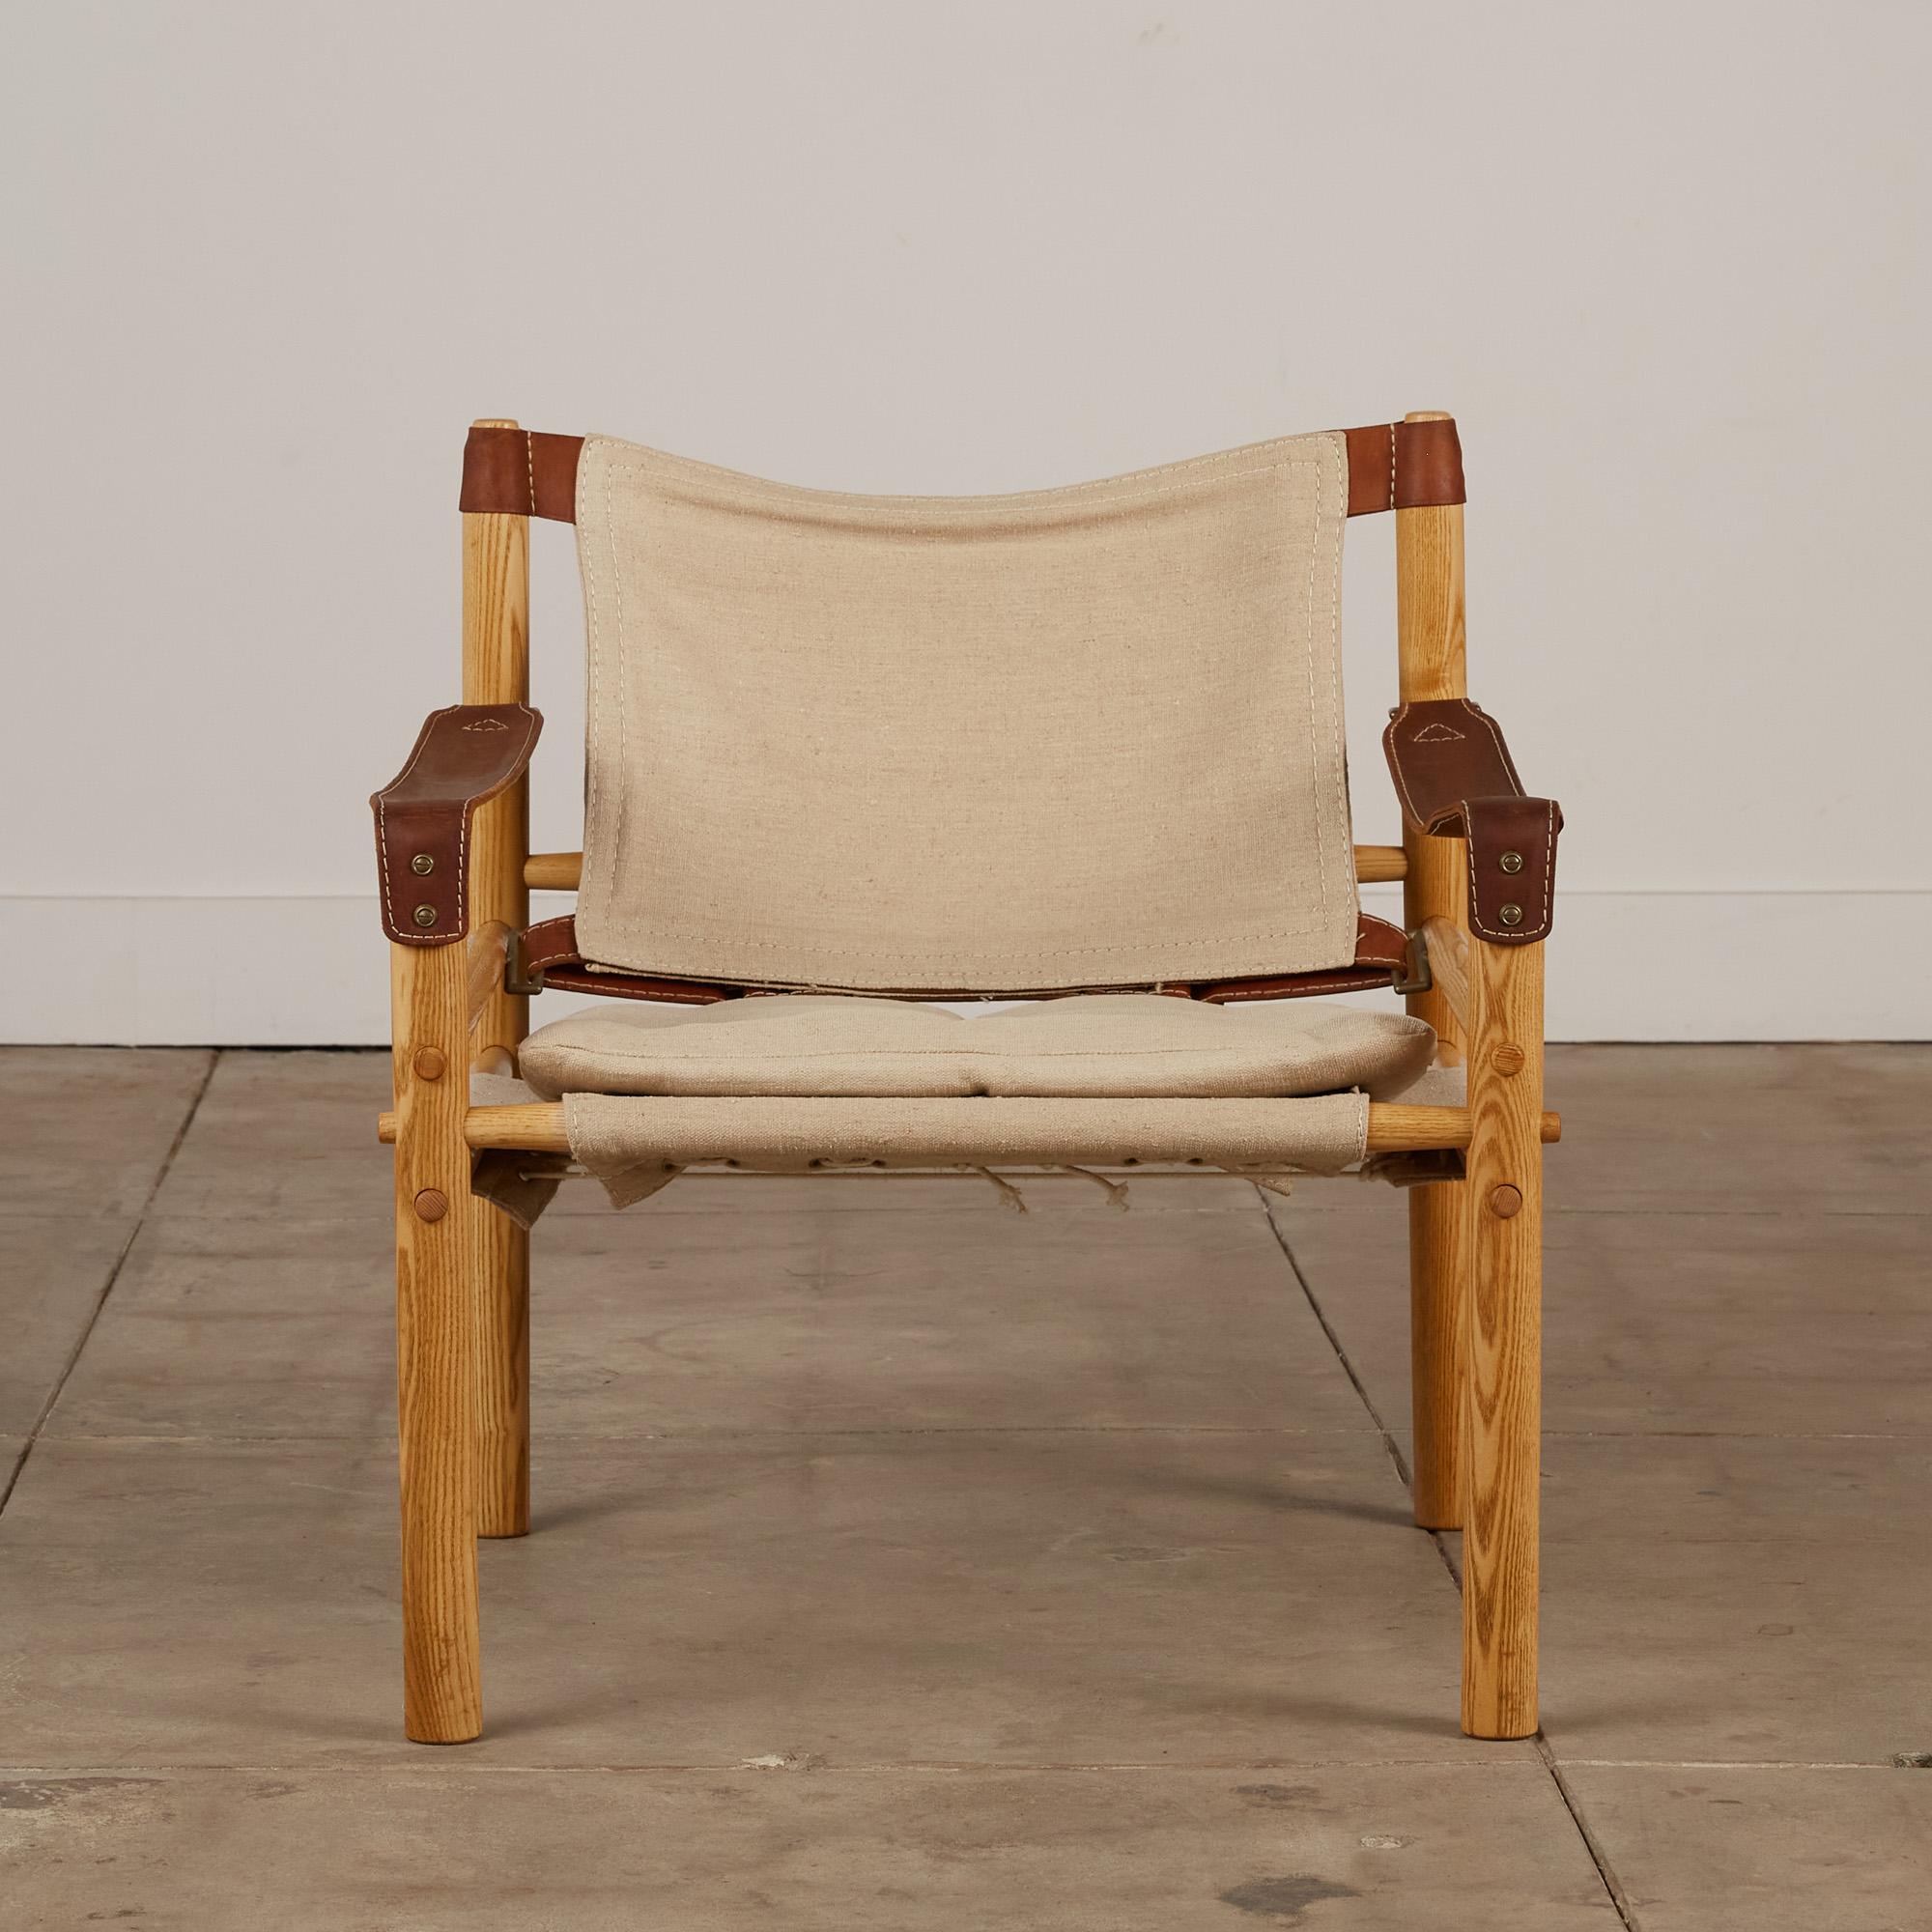 A safari chair designed by Arne Norell, made in Sweden c. 1960's. This chair features a solid oak frame strapped together by brown leather and natural colored canvas slings with brass fittings. A removable tufted canvas cushion sits on the lower